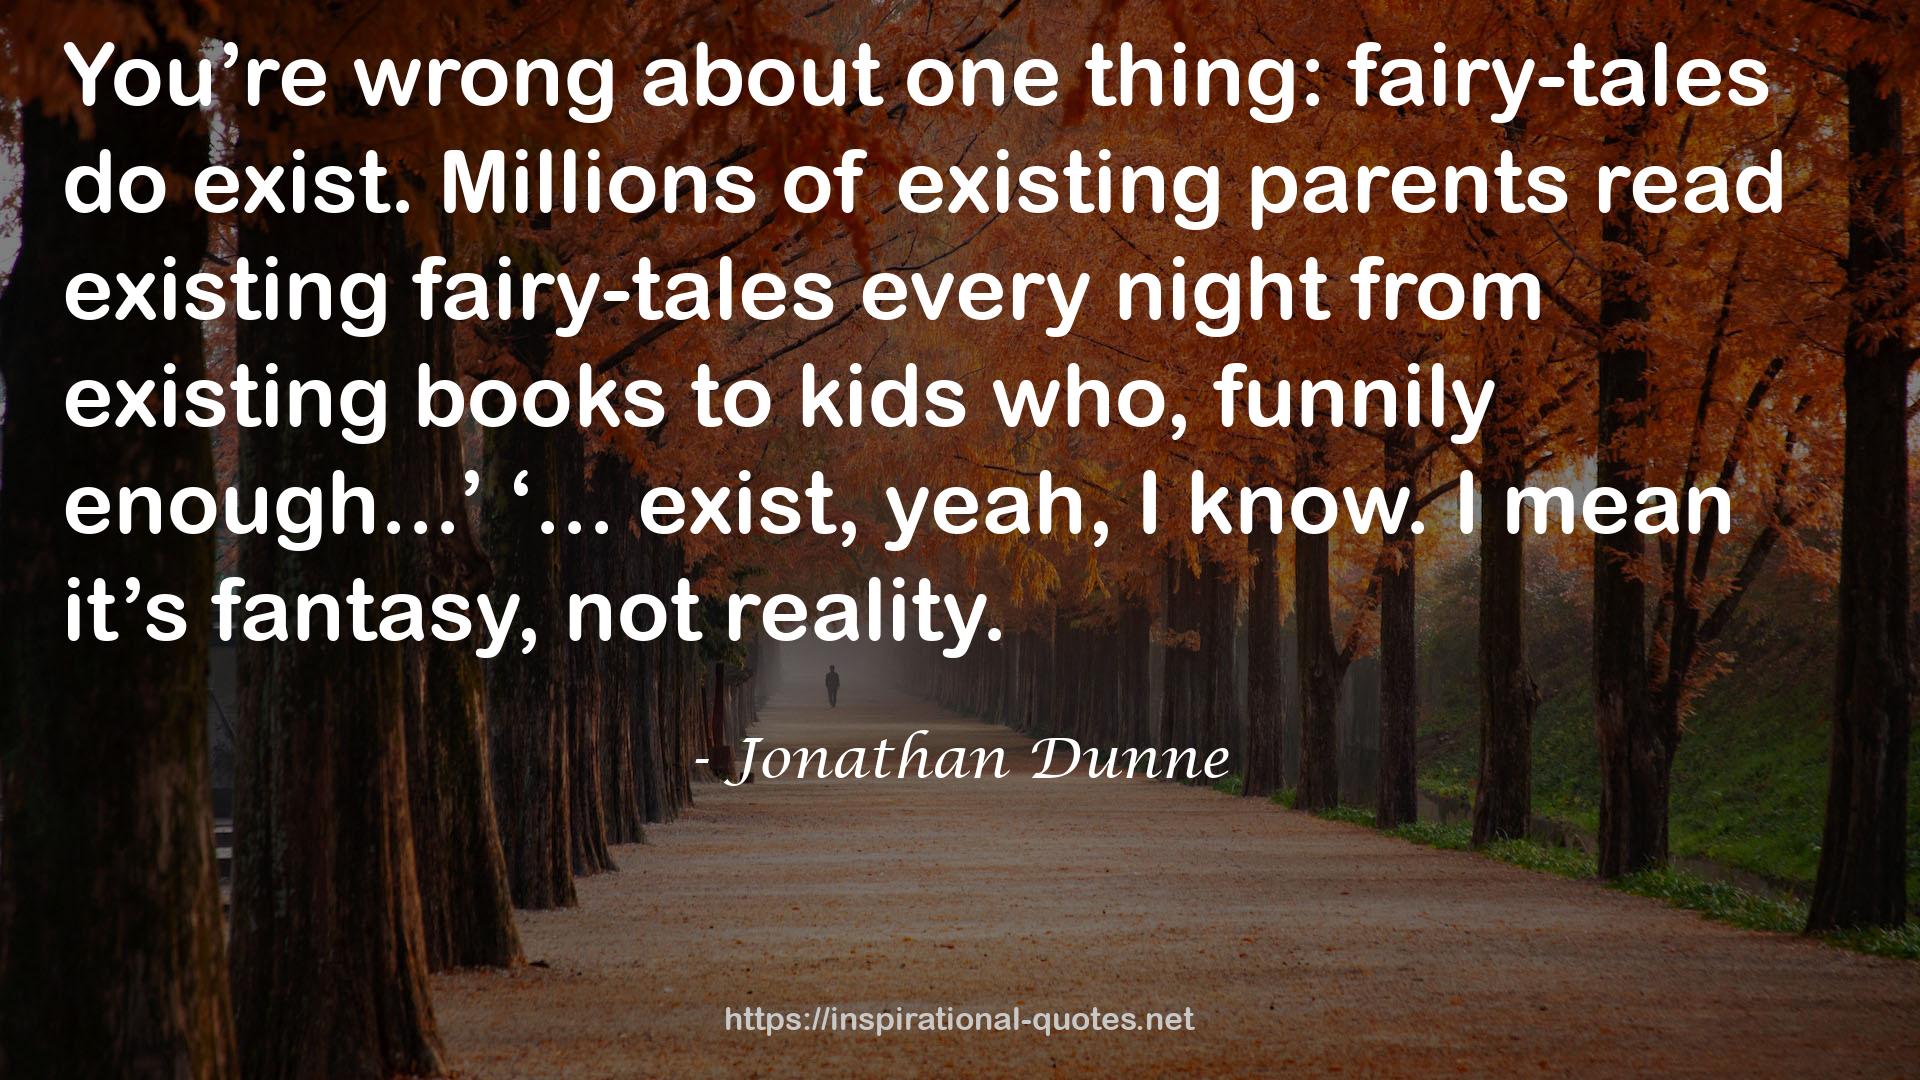 Jonathan Dunne QUOTES